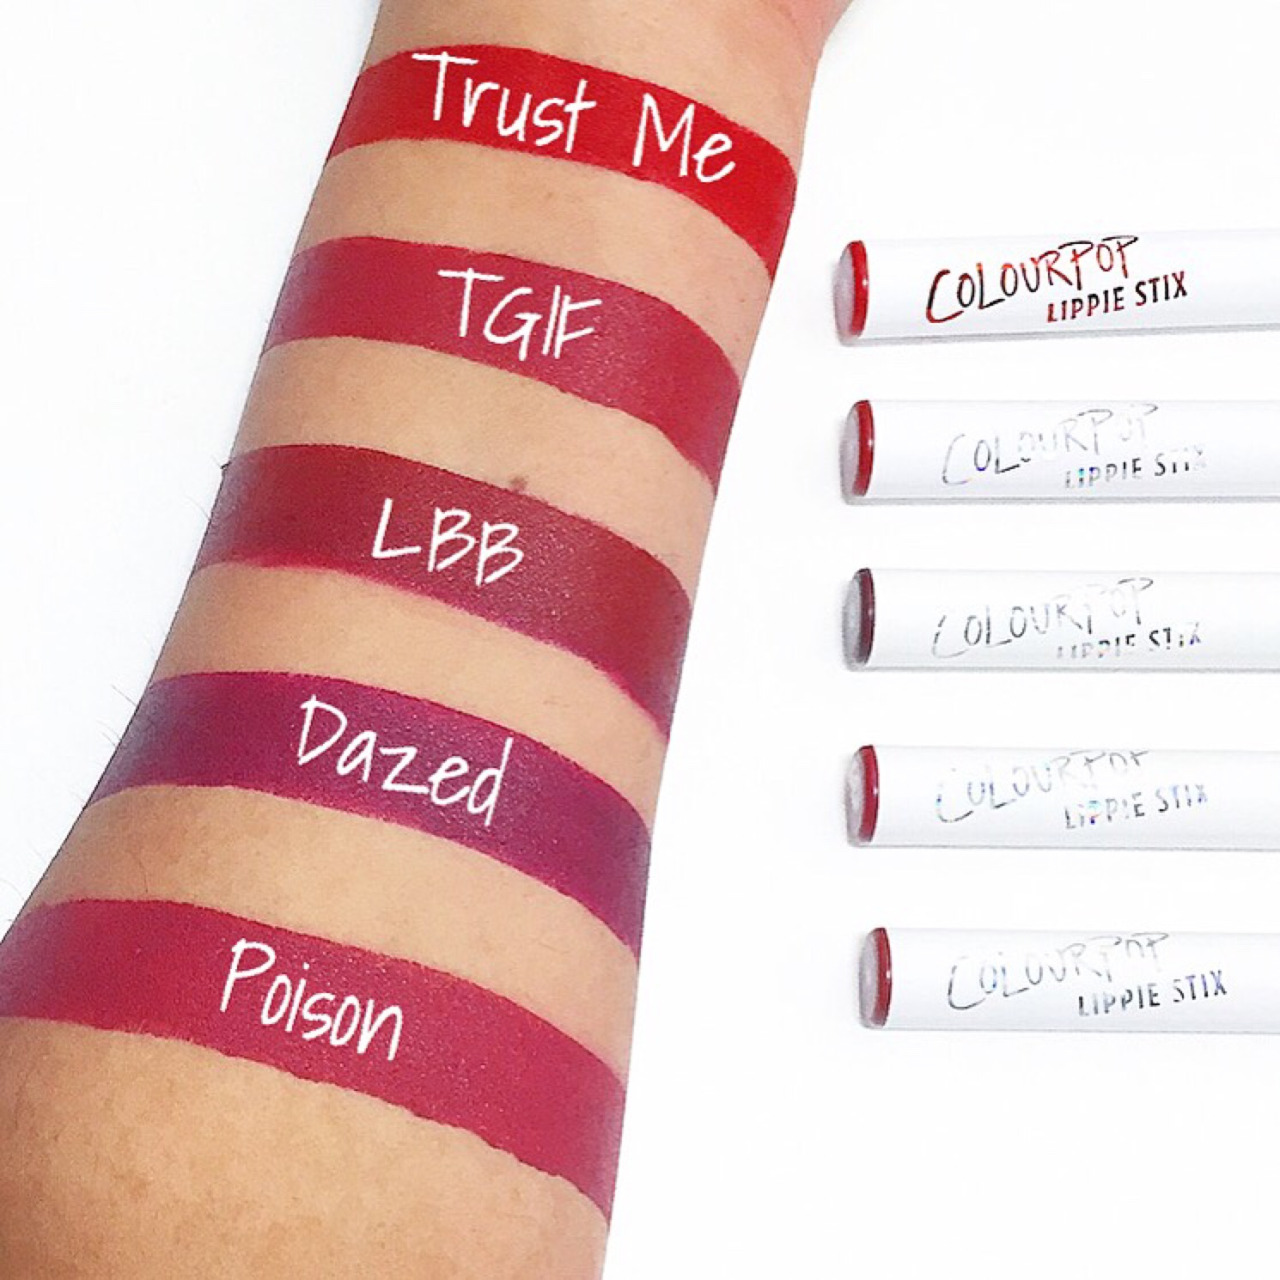 Colourpop Lippie Stix Review And Swatches Glamour And Giggles